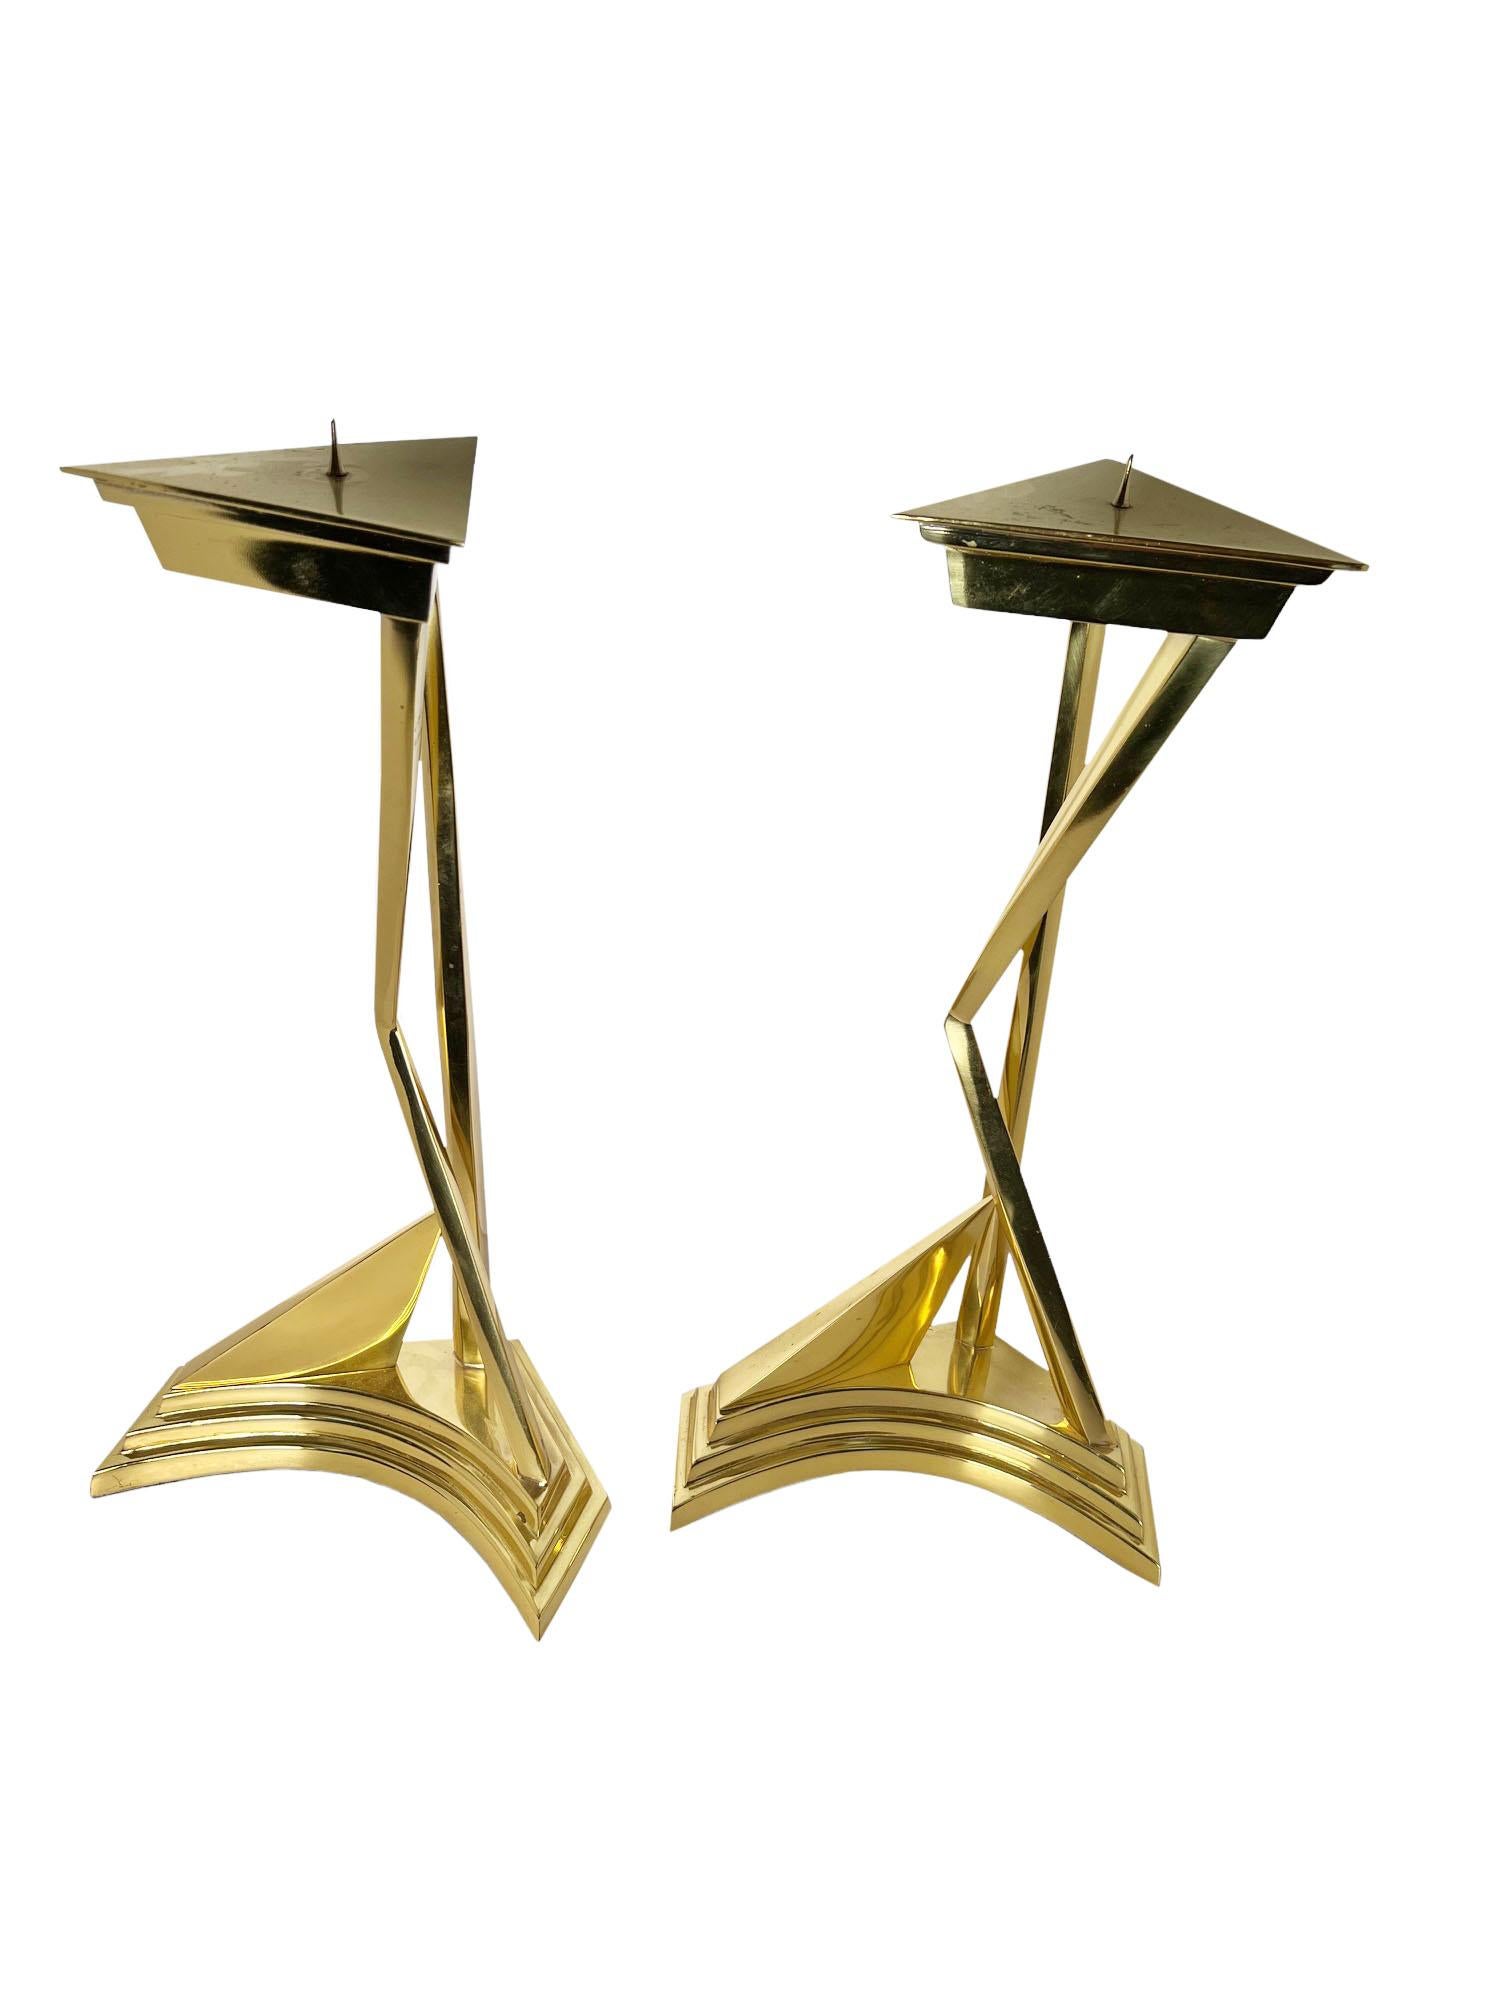 American Mid Century Brass Candlesticks For Sale